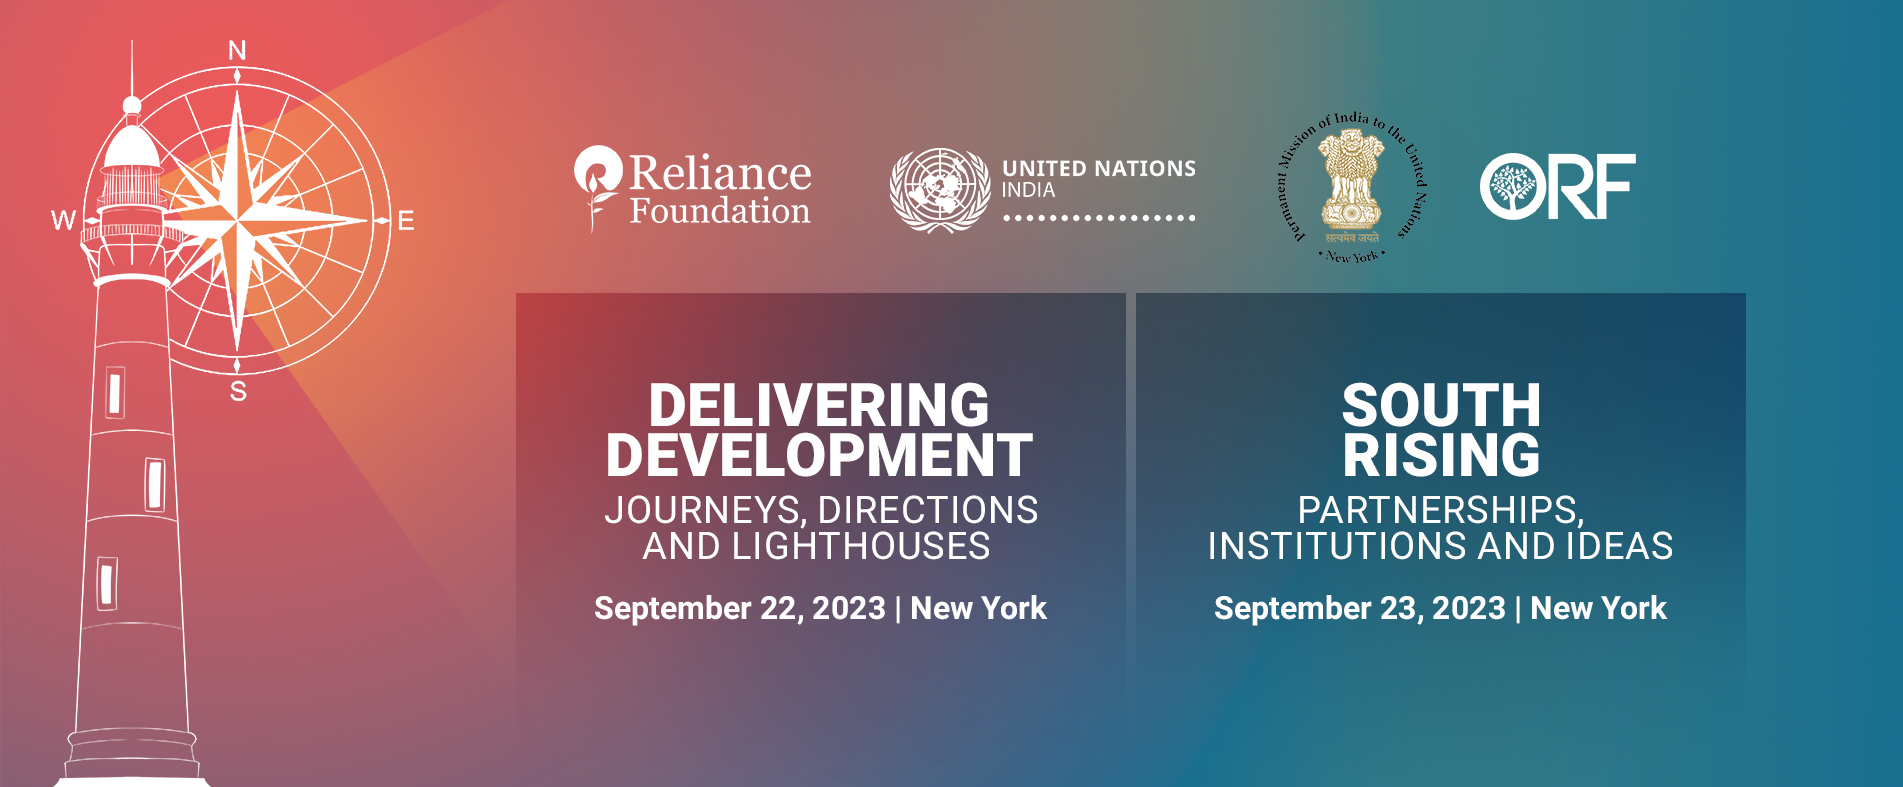 Reliance Foundation, ORF, and UN-India to hold two dialogues in New York amid UNGA week